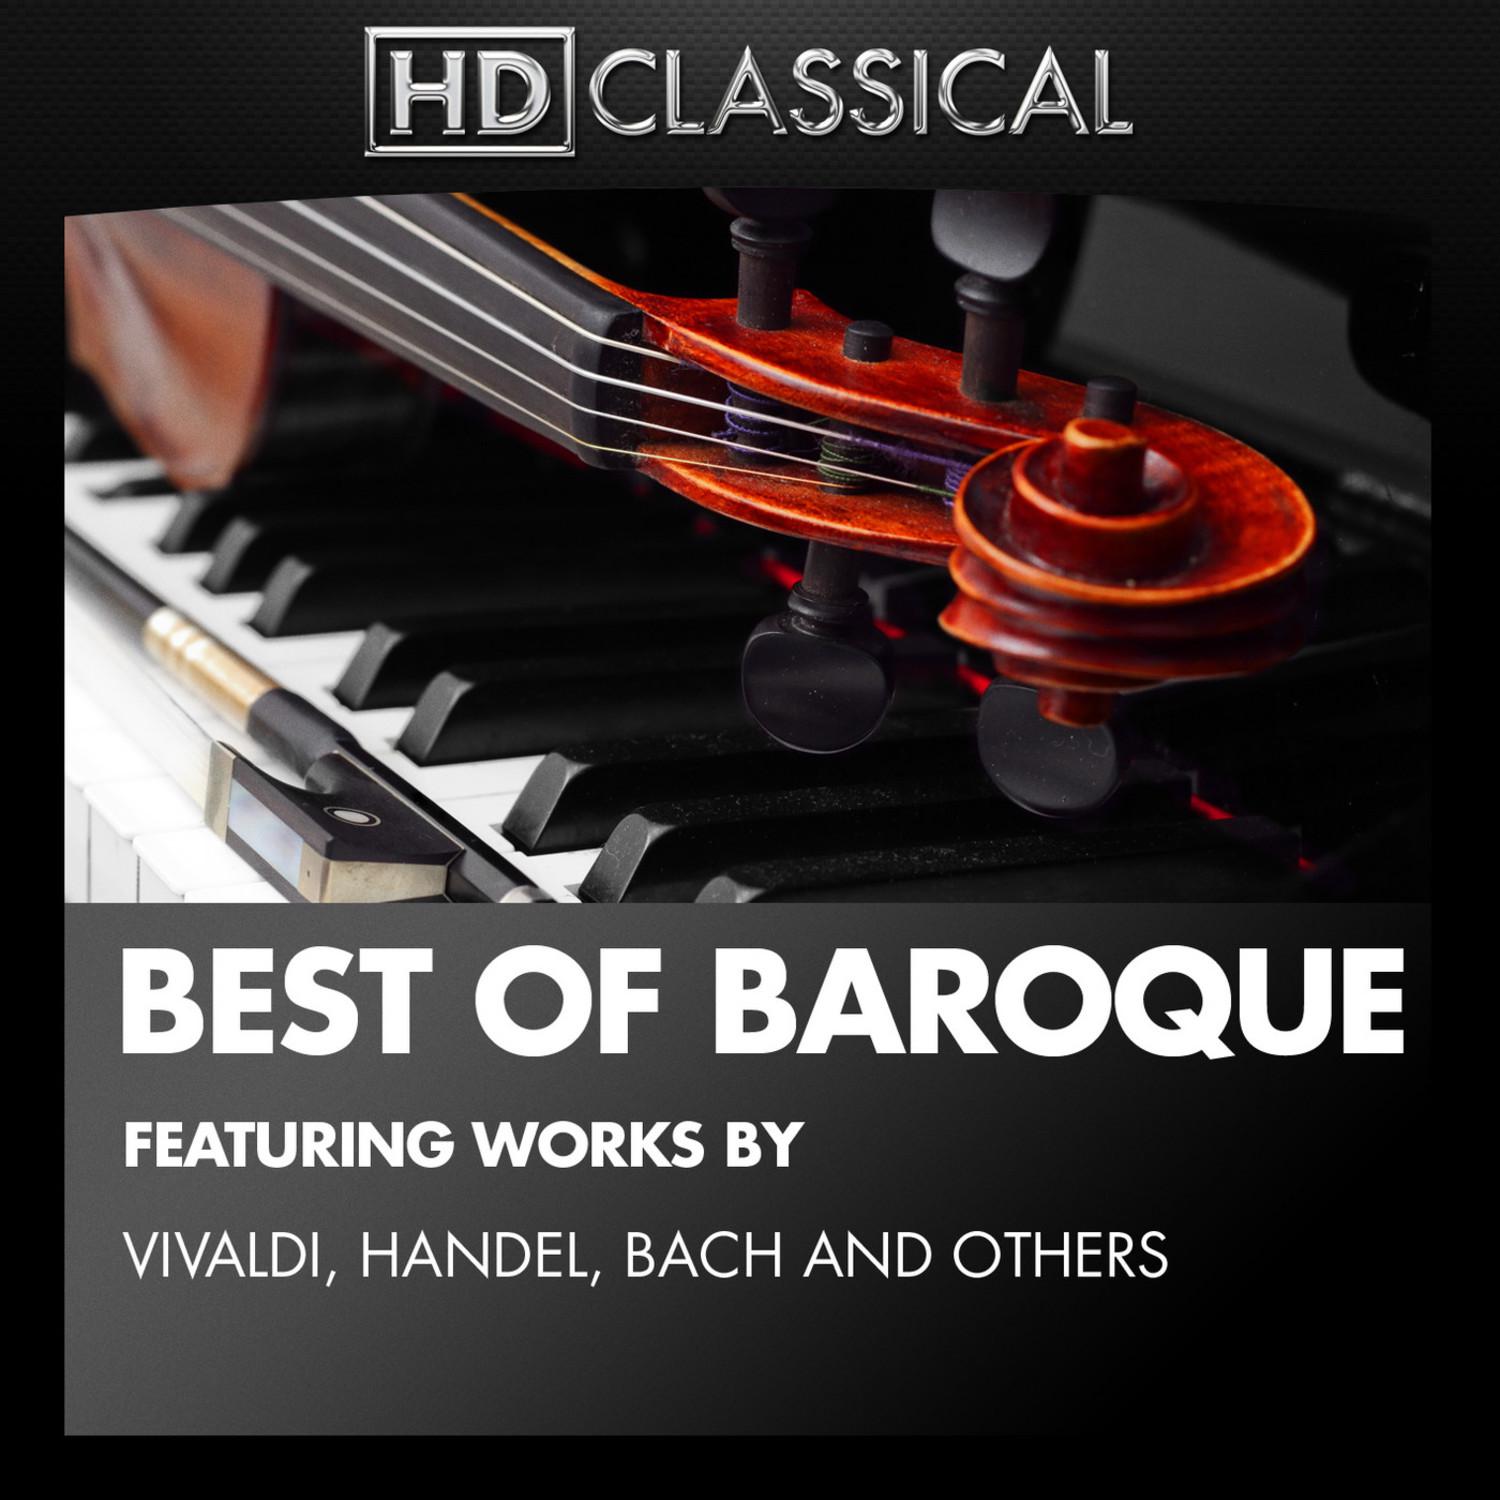 Best of Baroque Featuring Works by Vivaldi, Handel, Bach and Others